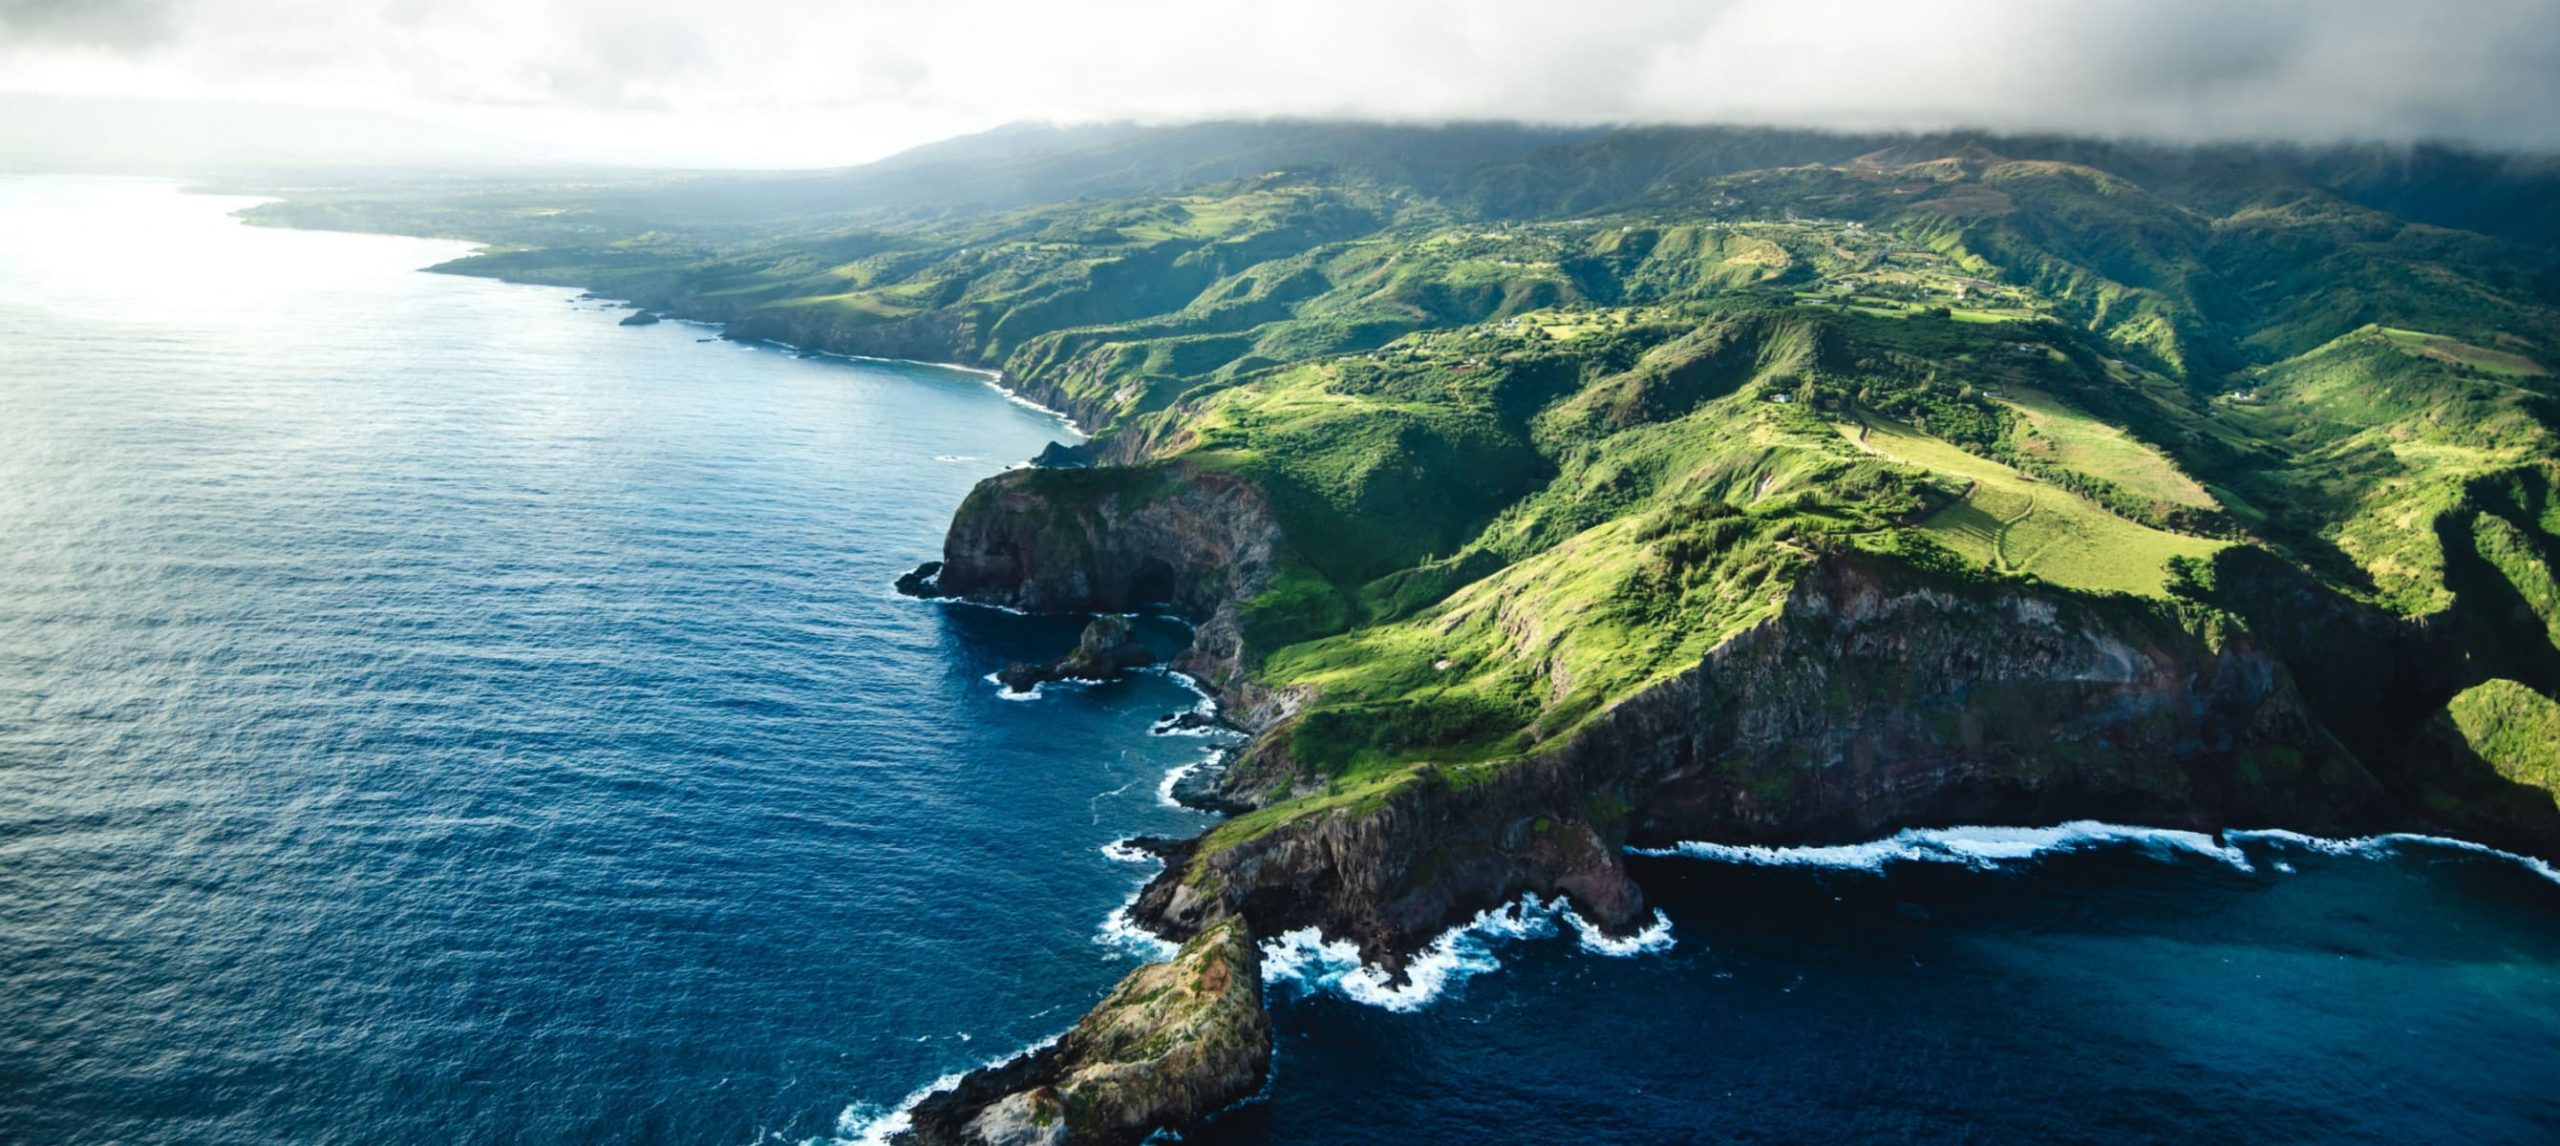 The 12 Top Things To Do in Maui, Hawaii